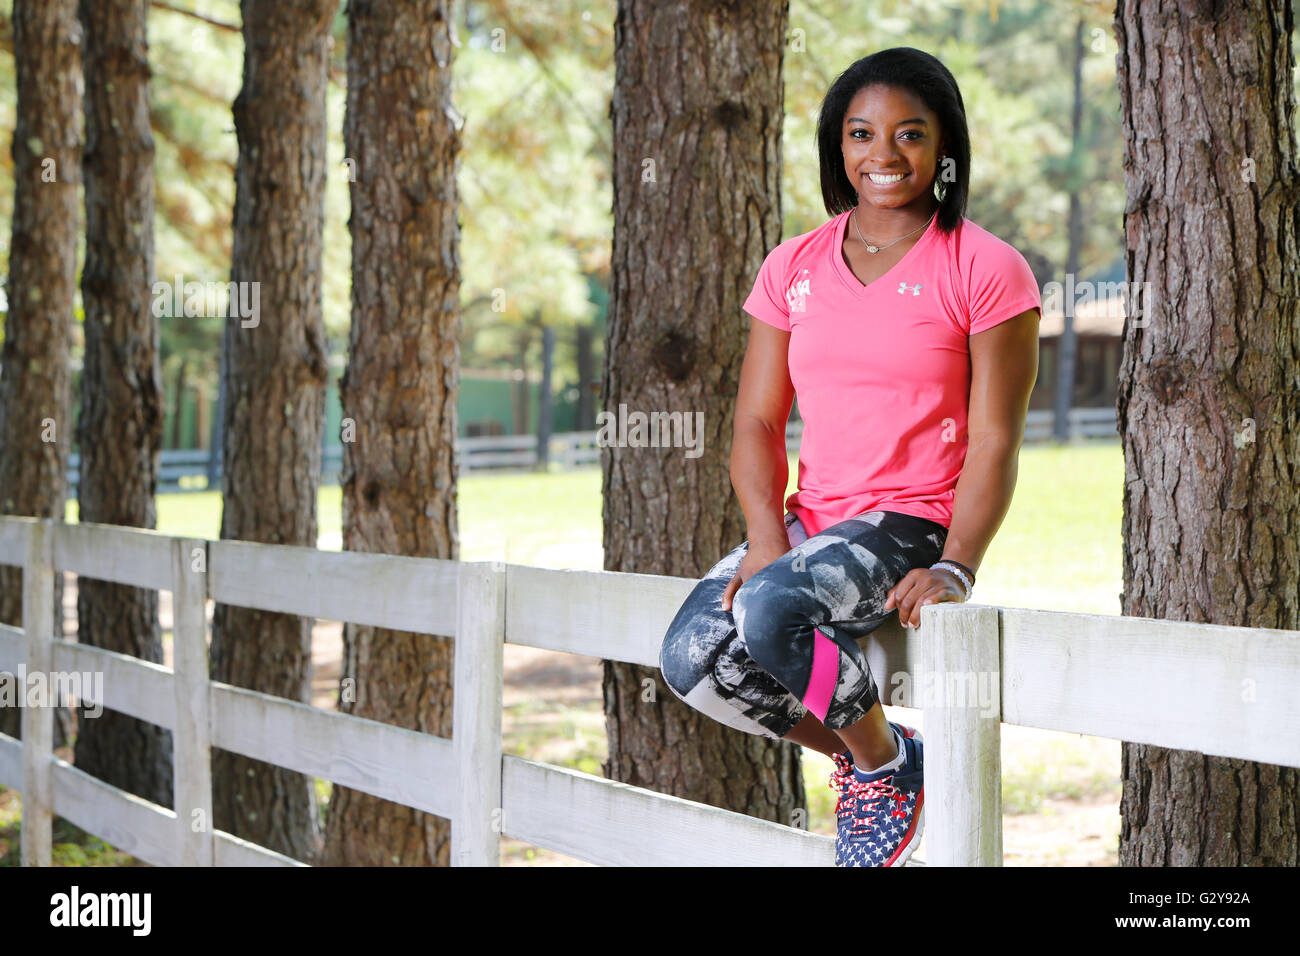 Simone Biles at the Karolyi Ranch, the USA Gymnastics National Team Training Center in the Sam Houston National Forest. Stock Photo